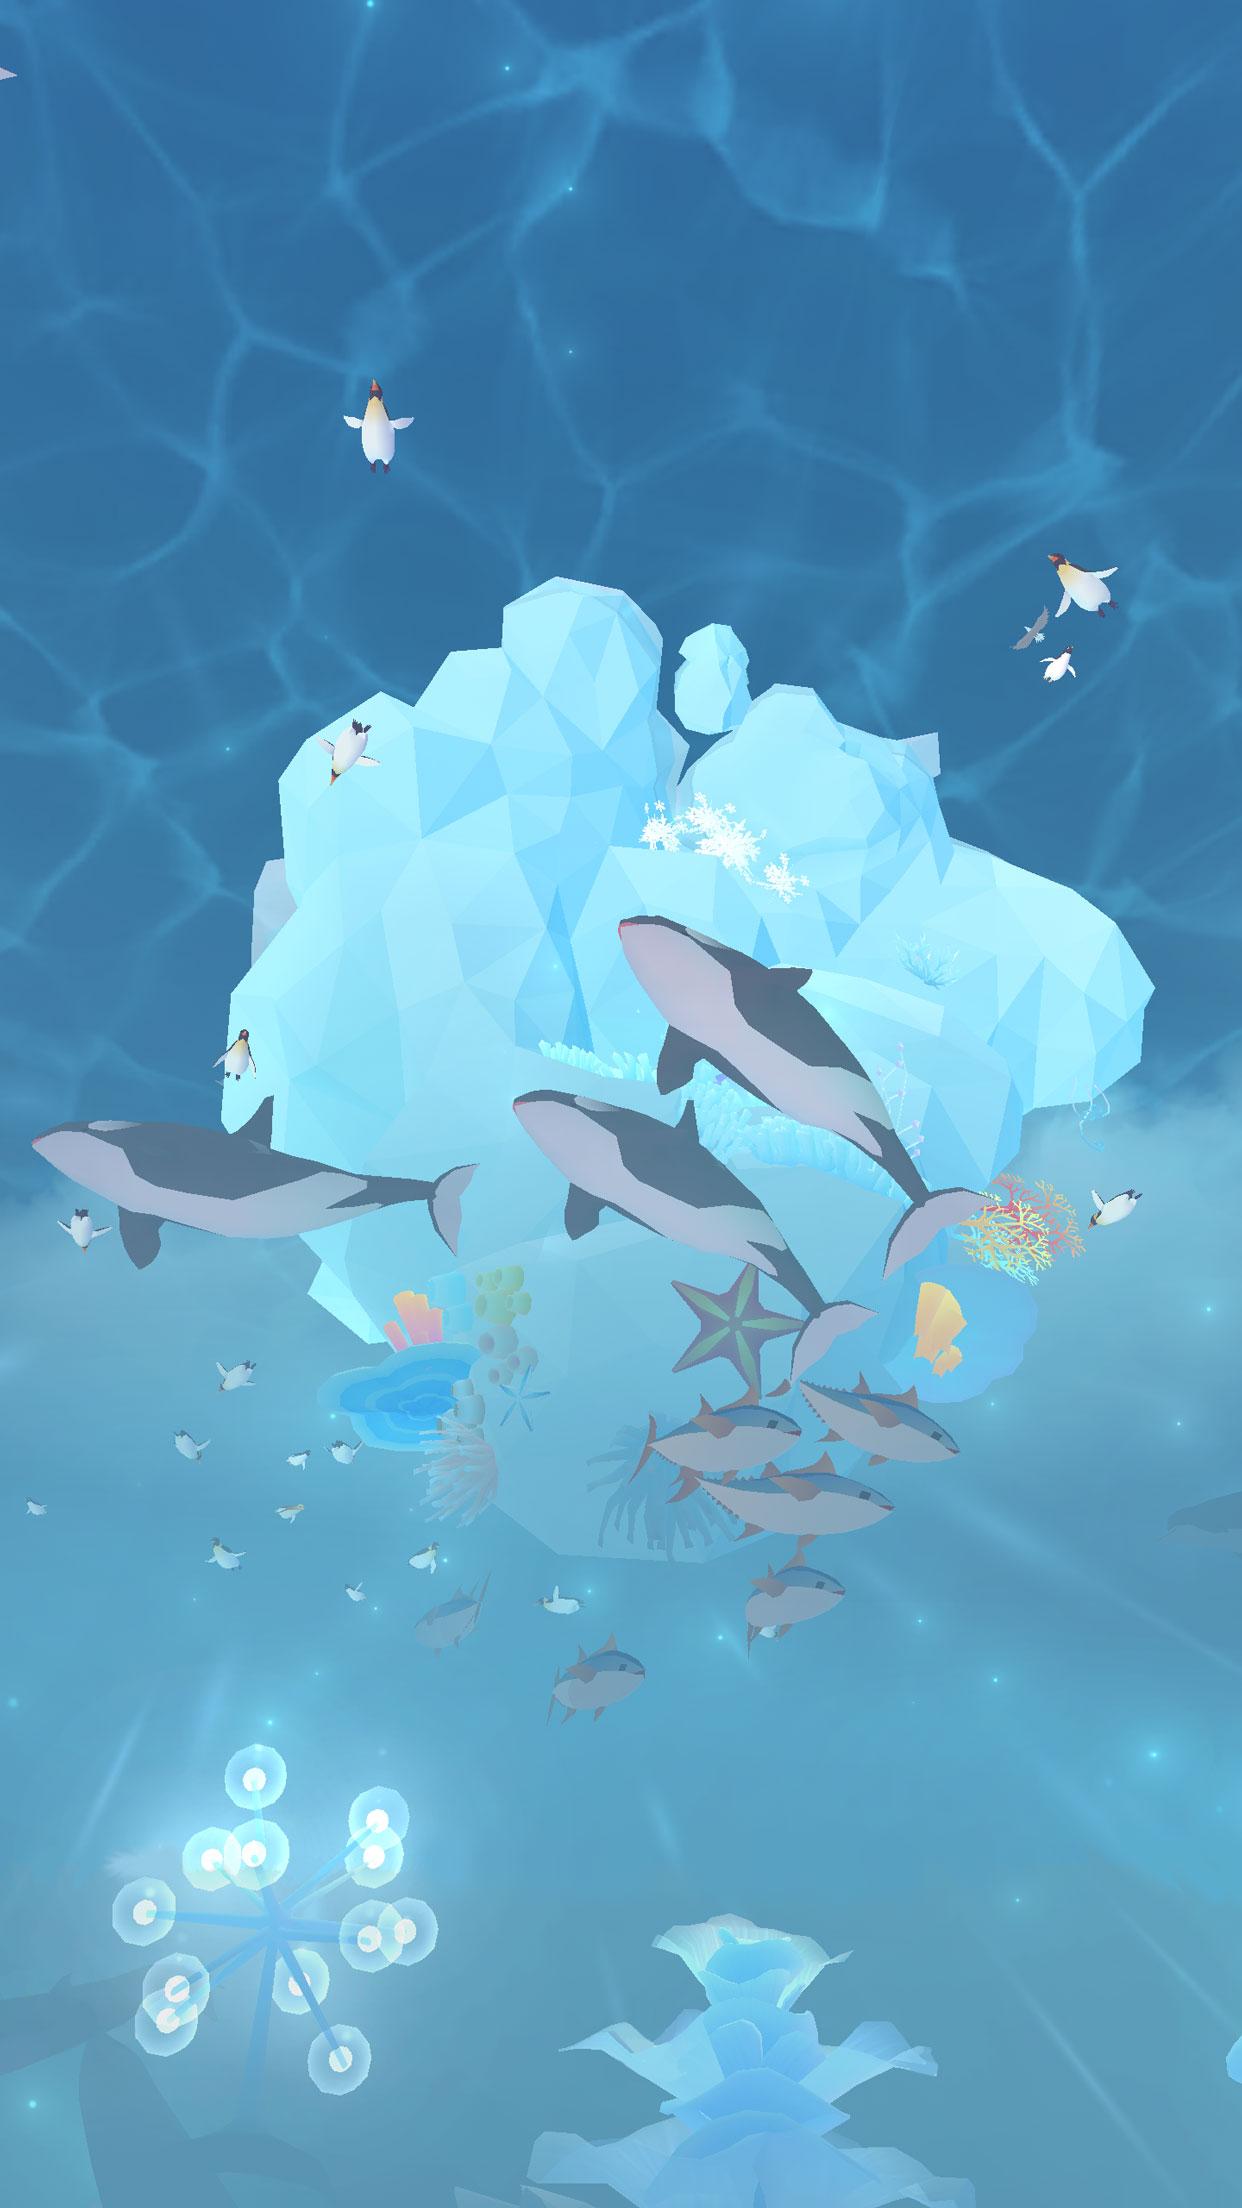 Tap Tap Fish - Abyssrium Pole (Unlimited Health)